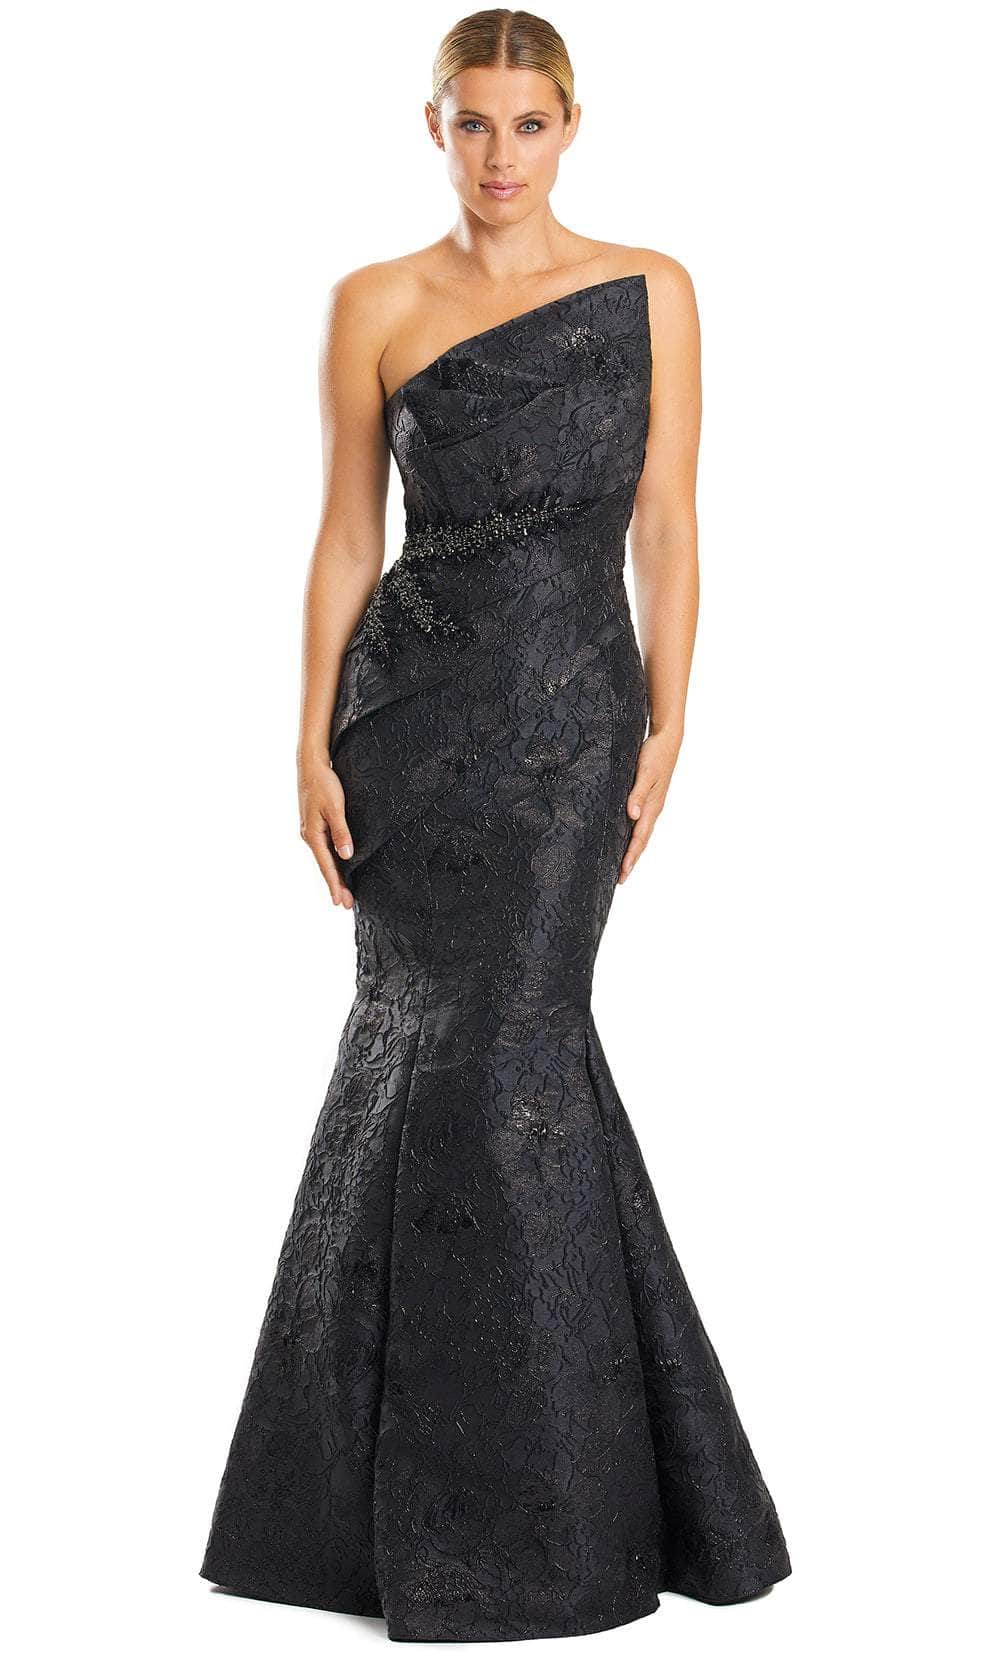 Image of Alexander by Daymor 1865F23 - Strapless Mermaid Evening Gown